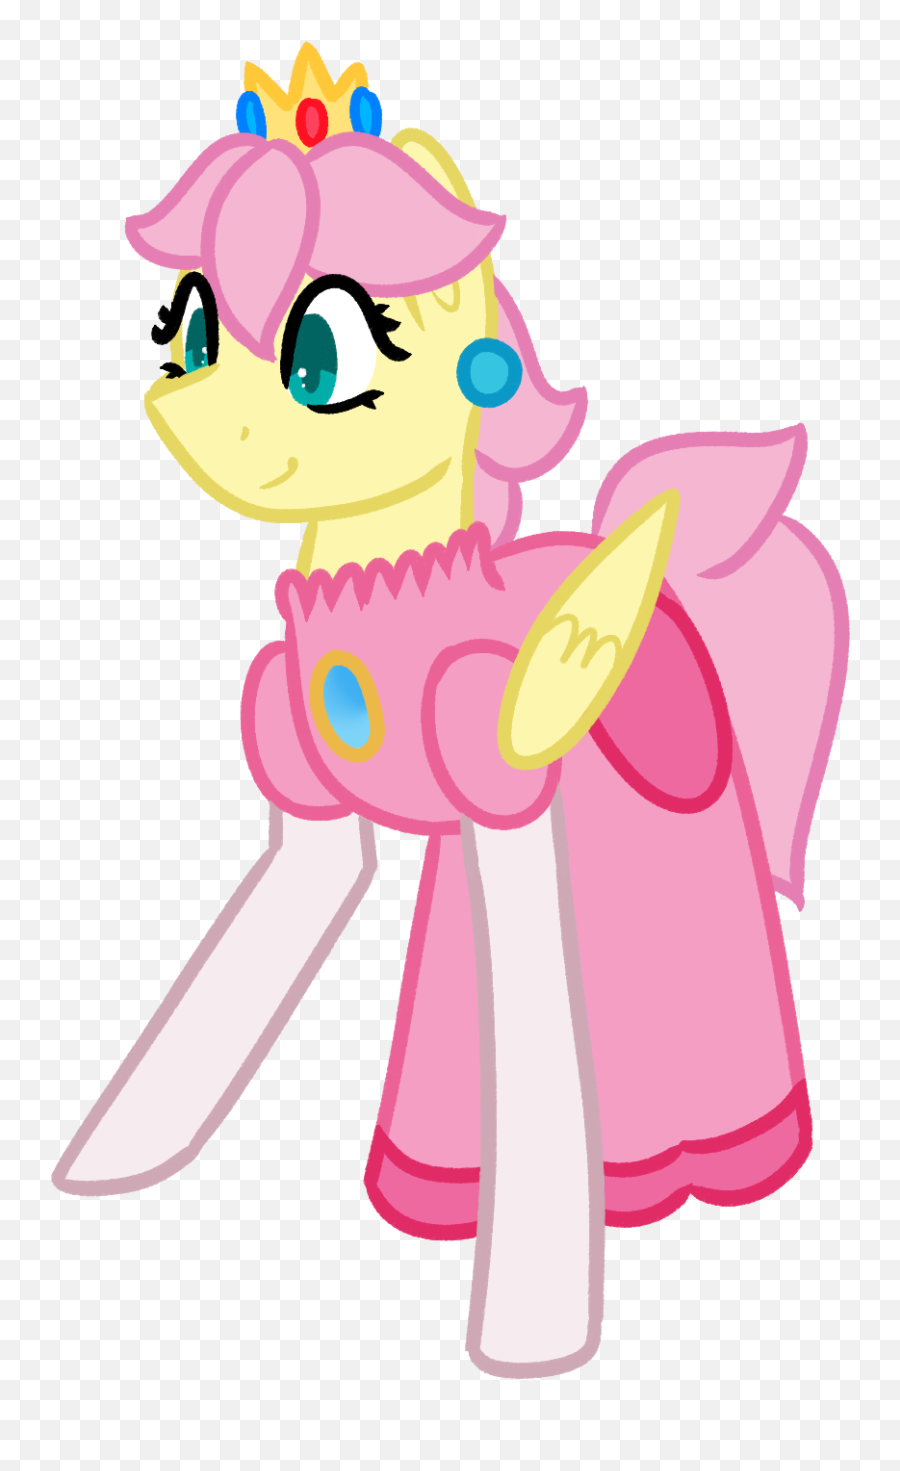 Download Hd Azure - Quill Clothes Cosplay Costume Dress Fluttershy As Princess Peach Png,Fluttershy Png